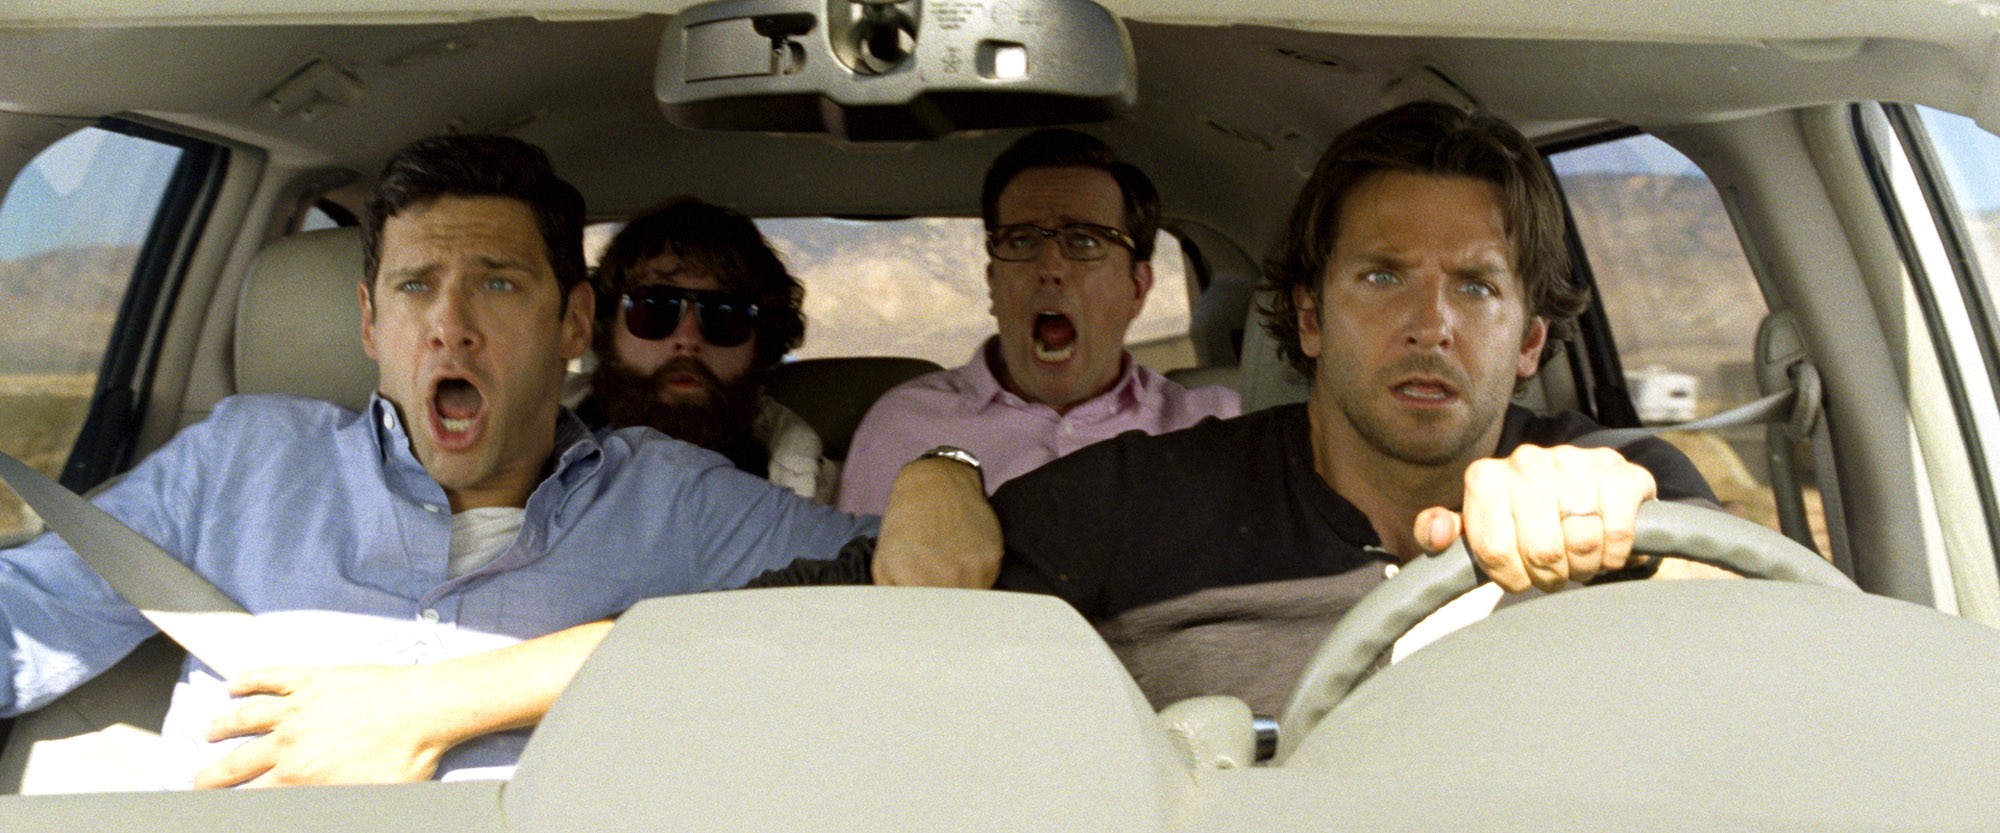 Justin Bartha, Zach Galifianakis, Ed Helms and Bradley Cooper in Warner Bros. Pictures' The Hangover Part III (2013)